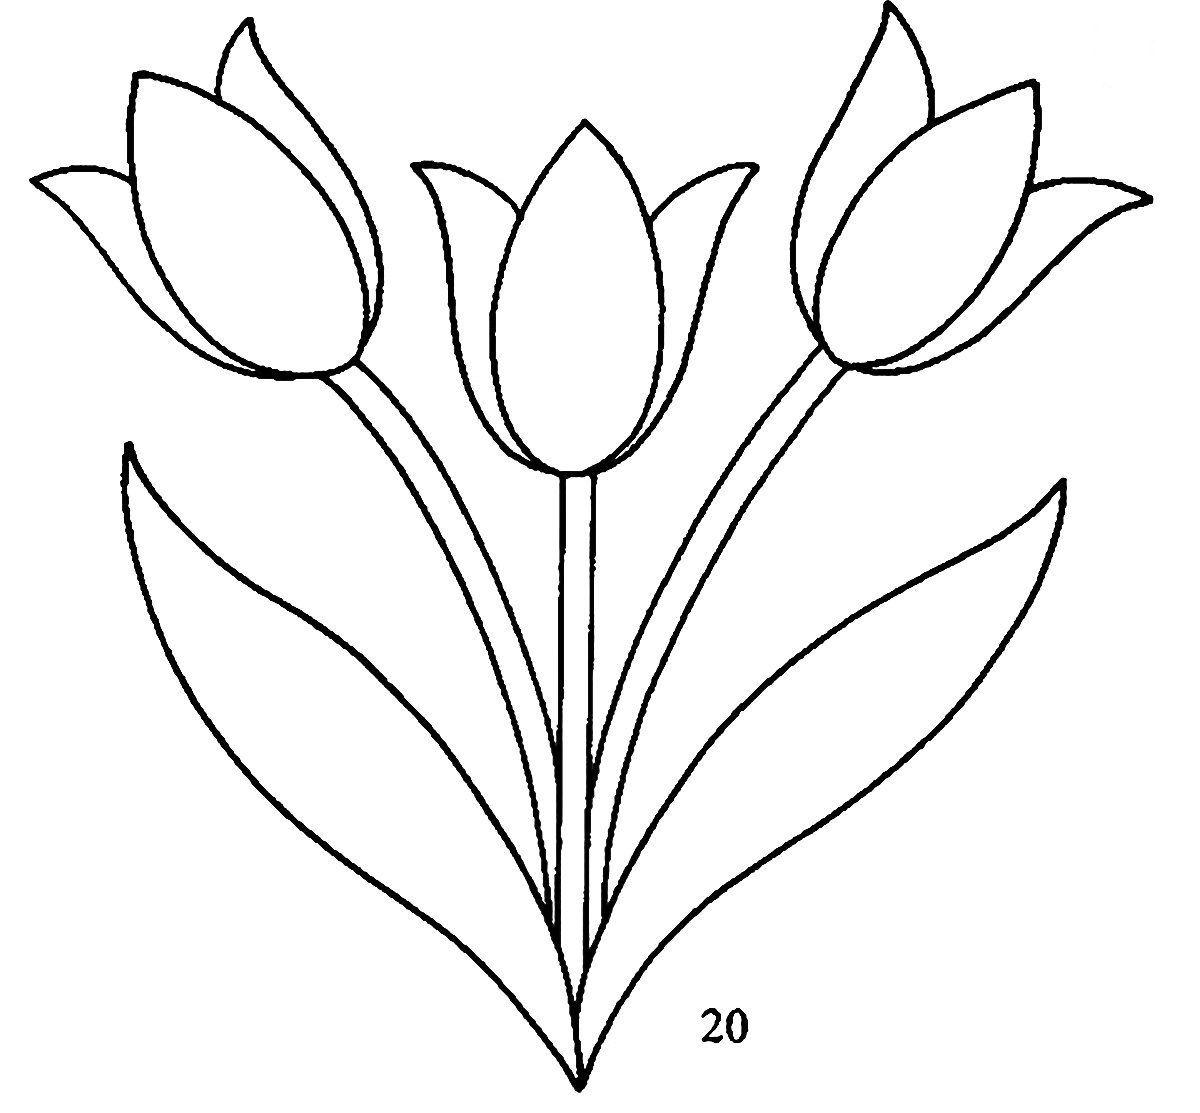 Funny tulips coloring for children 5-6 years old